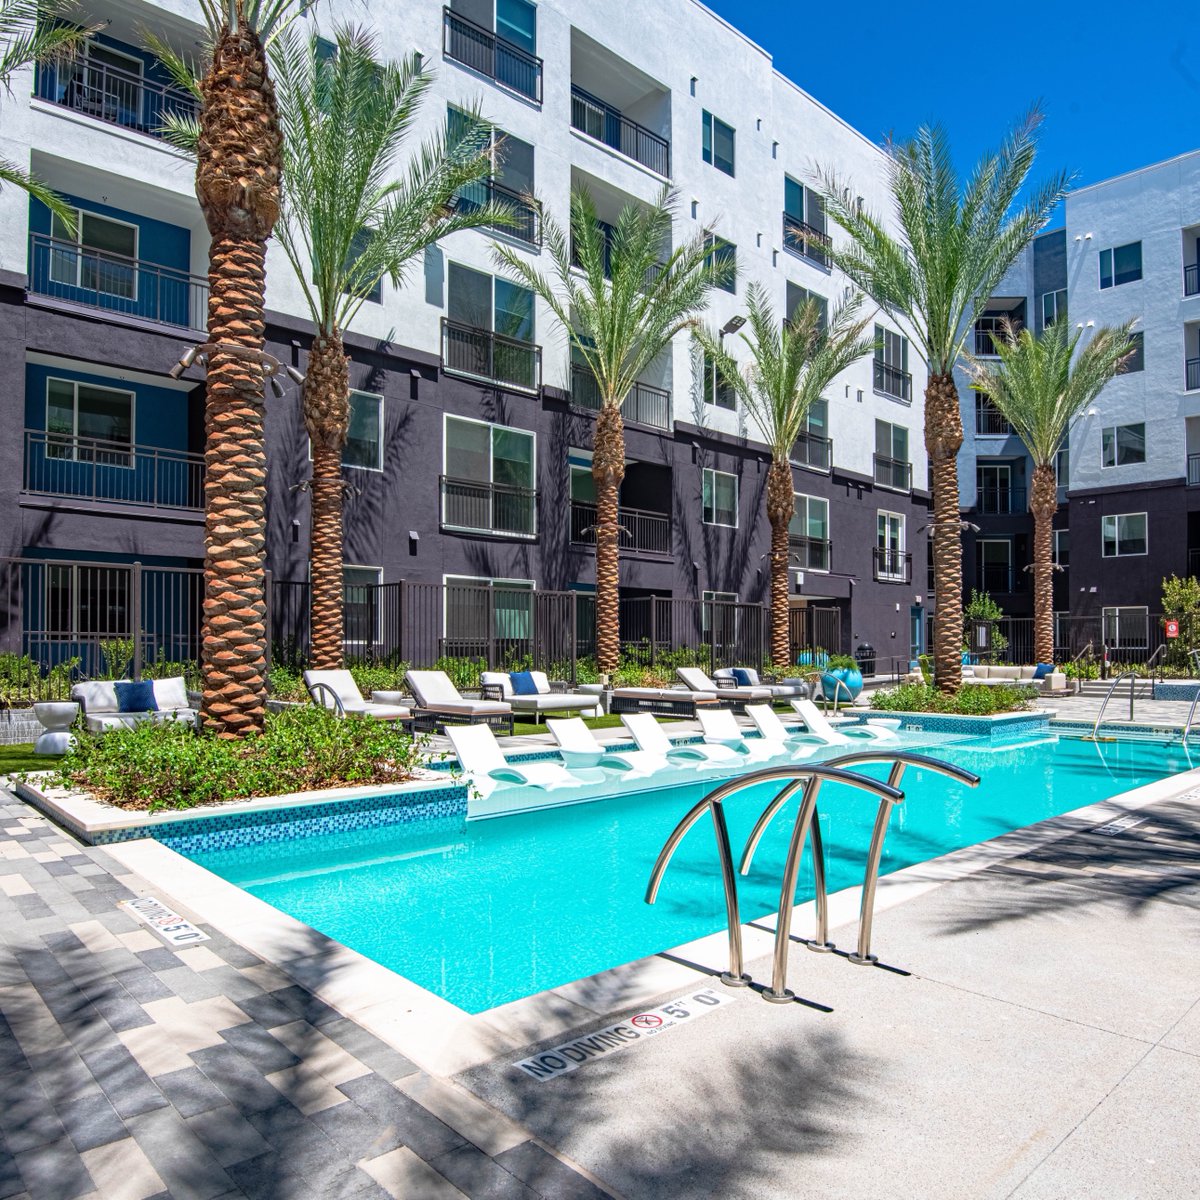 Pool season never looked so good! Take a tour of Tanager Echo today and explore!